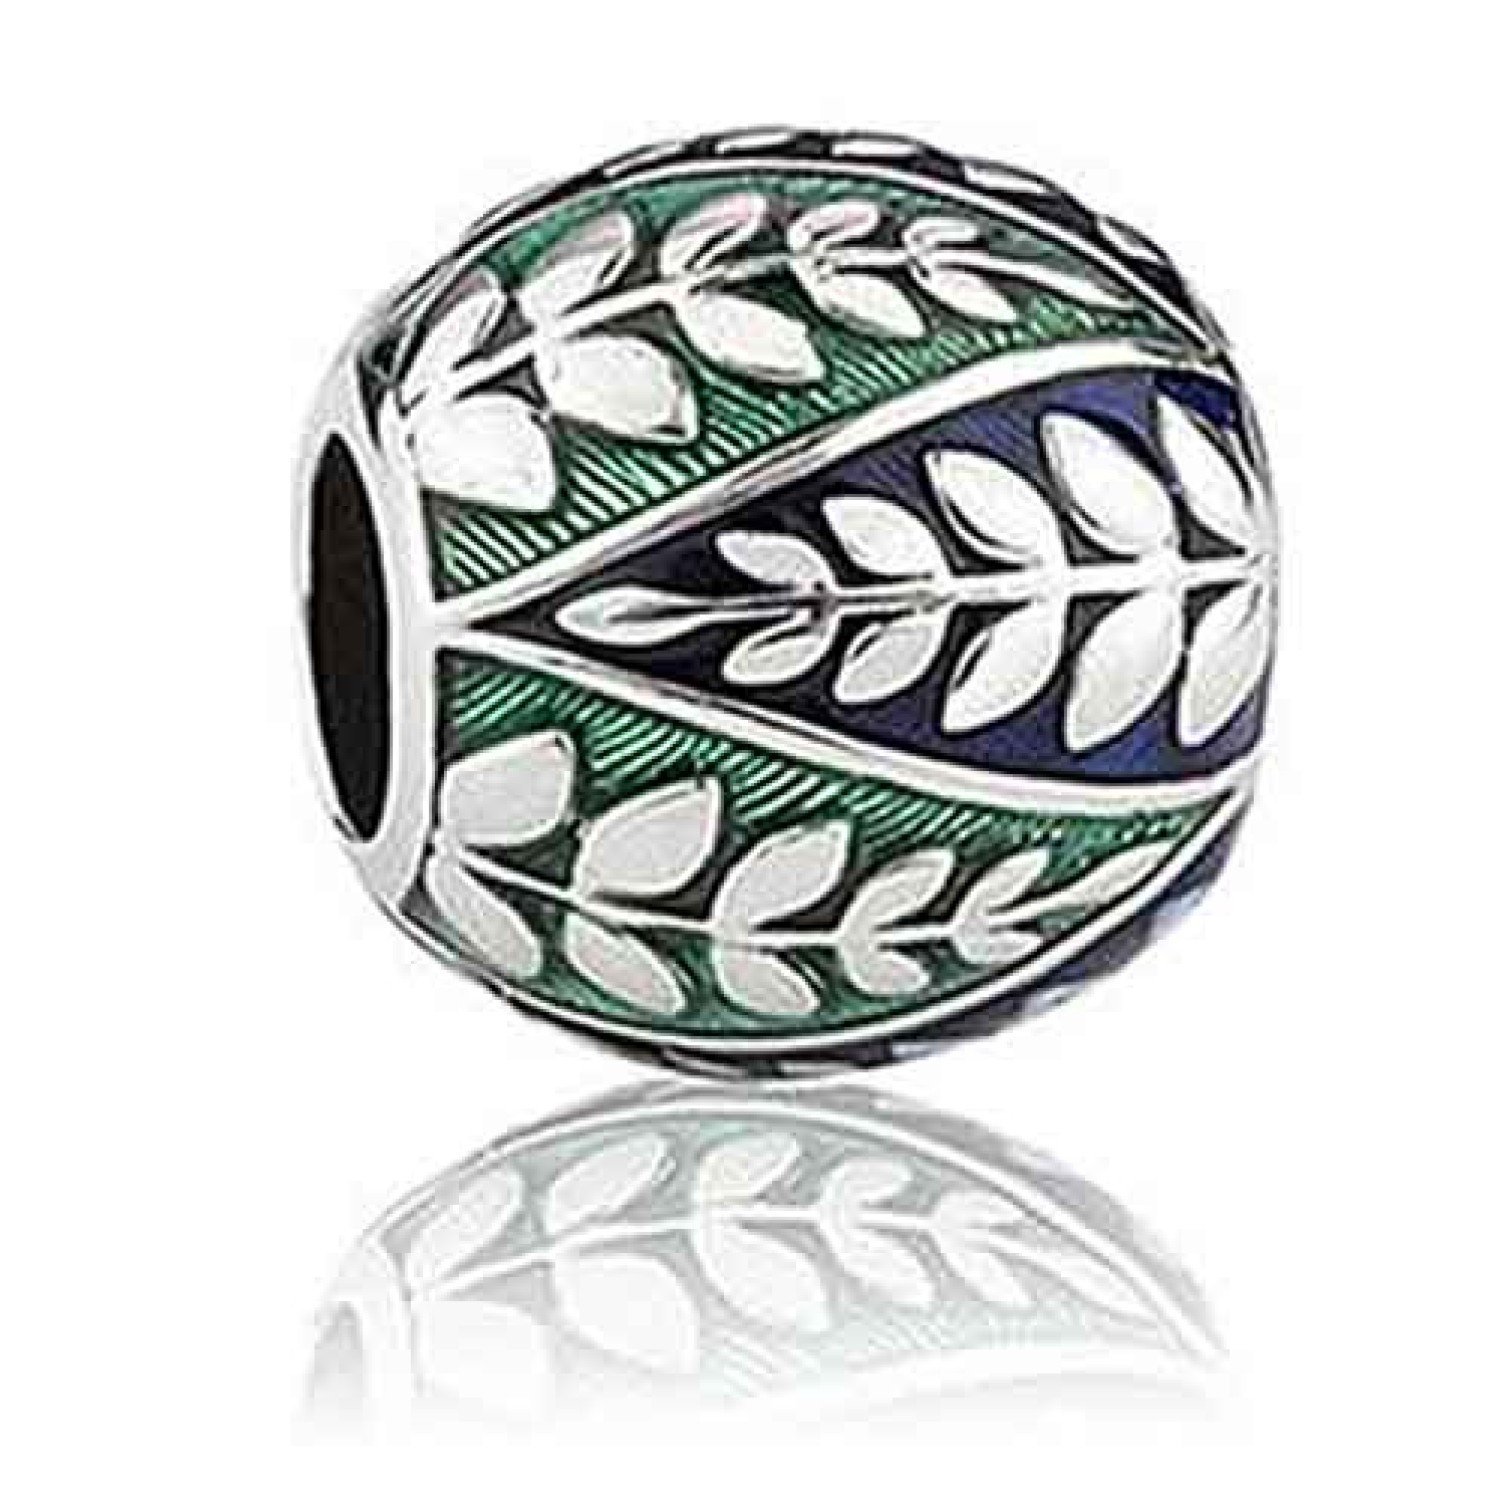 LKE030 Evolve Charms Coastal Fern Silver. The highly treasured symbol of the silver fern is emblazoned on our blue and green enamel charm, evoking a sense of pride which New Zealanders feel for their beautiful homeland. The vibrant blue symbolises the pri